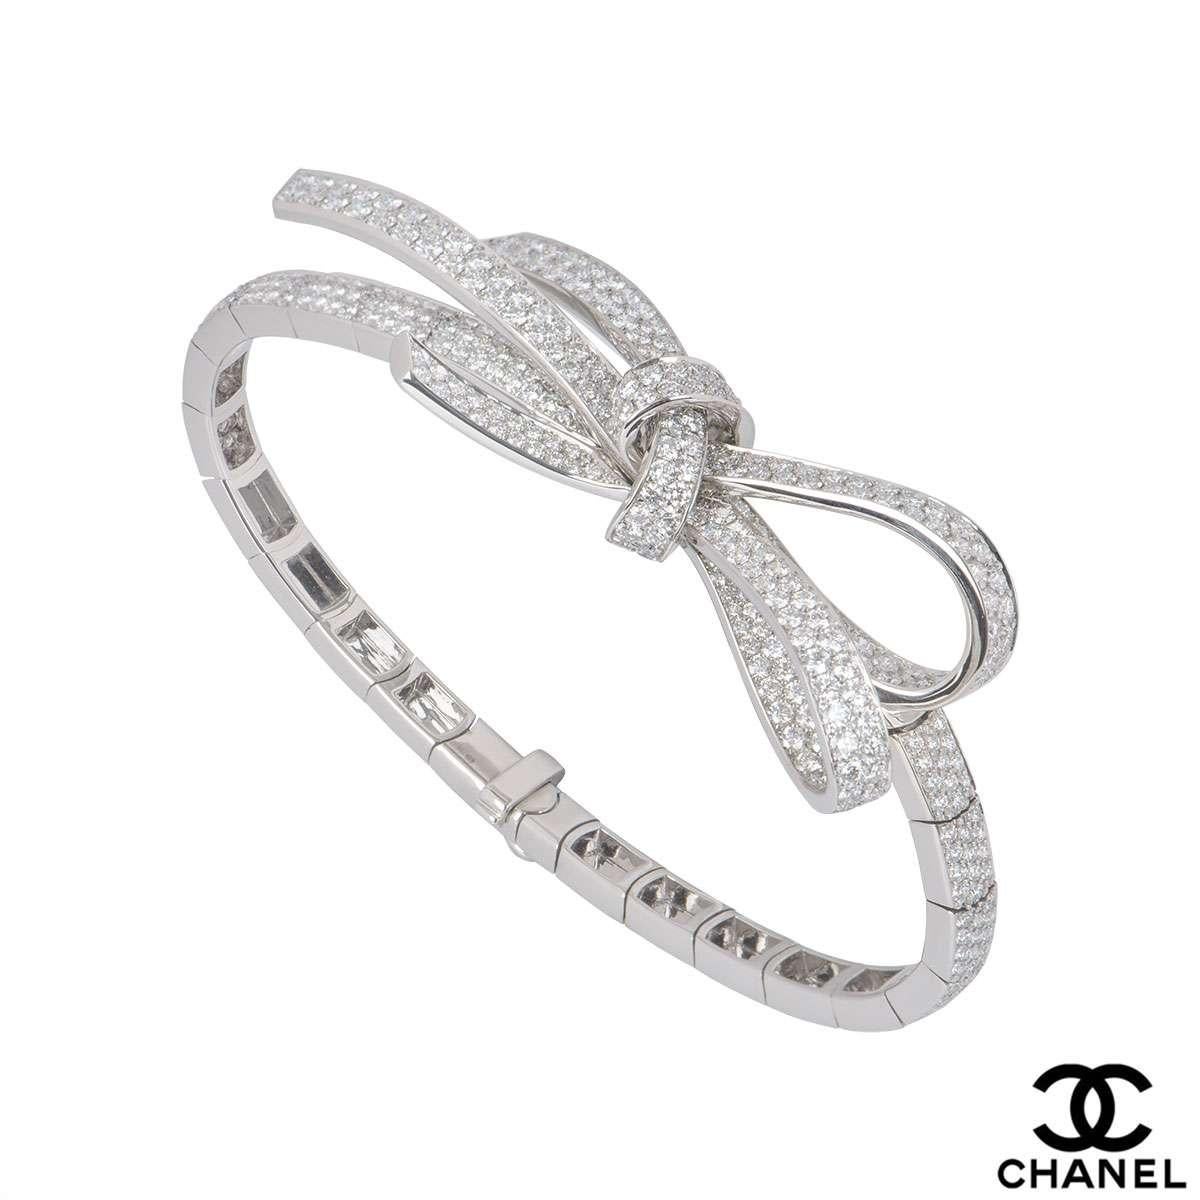 A stunning 18k white gold diamond bracelet from the Ruban collection by Chanel. The bracelet has a large pave diamond ribbon motif with diamond set flexi links. There are 389 diamonds with a total carat weight of 5.59ct. The ribbon motif measures